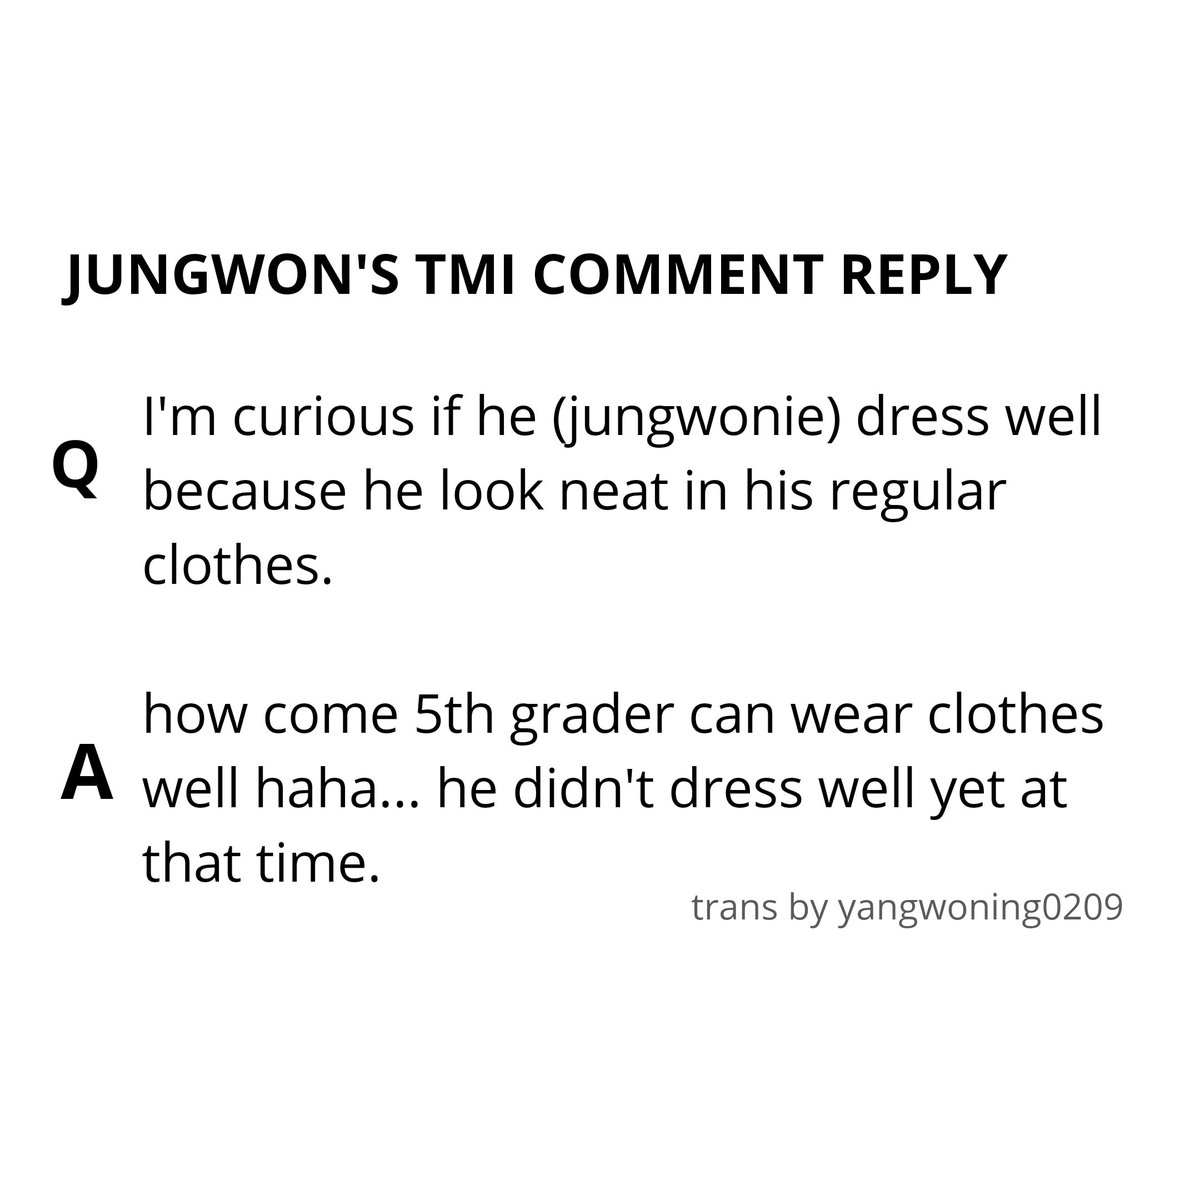 [4] About his fashion style! this OP is kinda funny and to the point tho